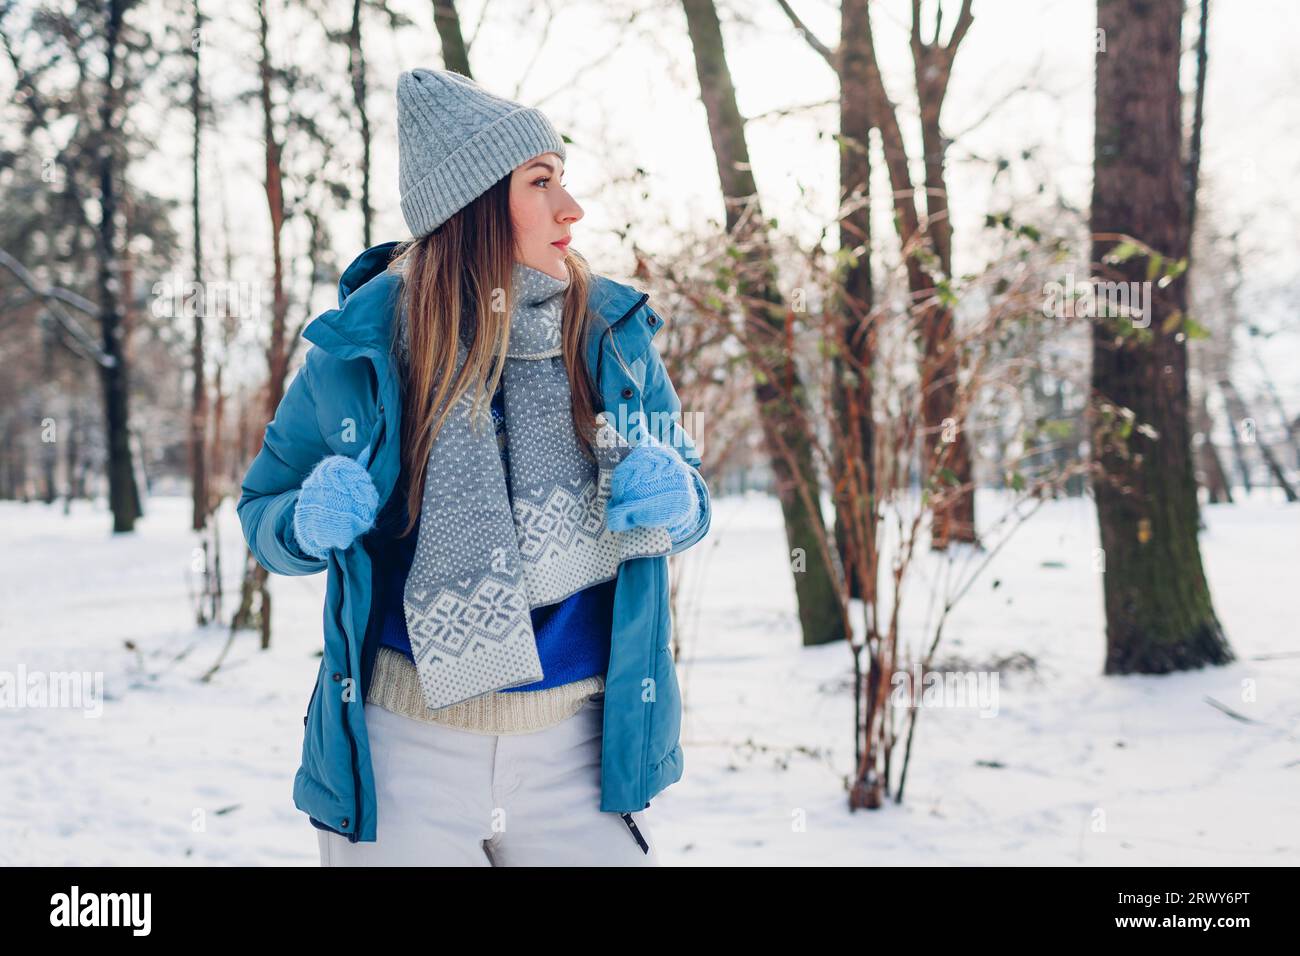 Portrait of young woman putting on blue coat walking in snowy